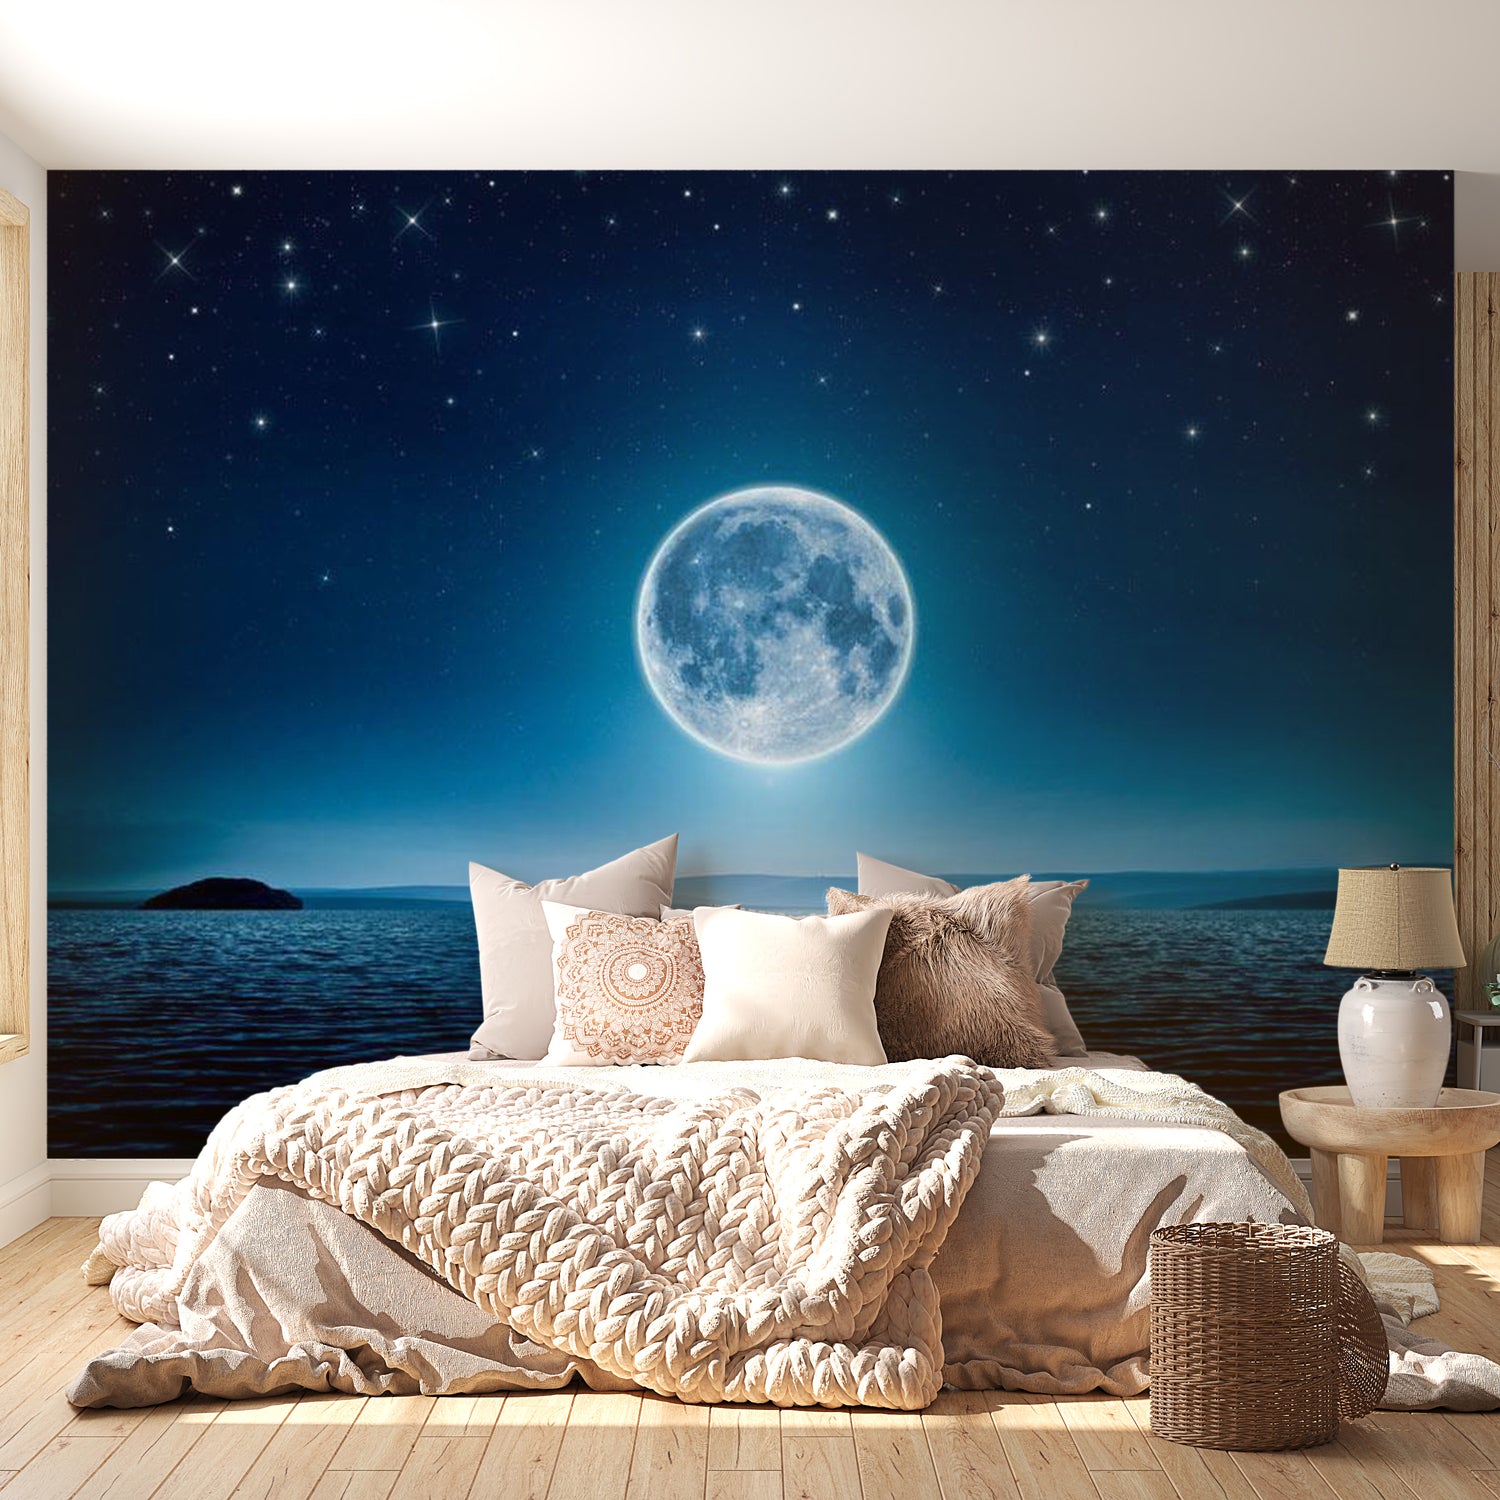 Peel & Stick Space Wall Mural - Moonlit Night - Removable Wall Decals